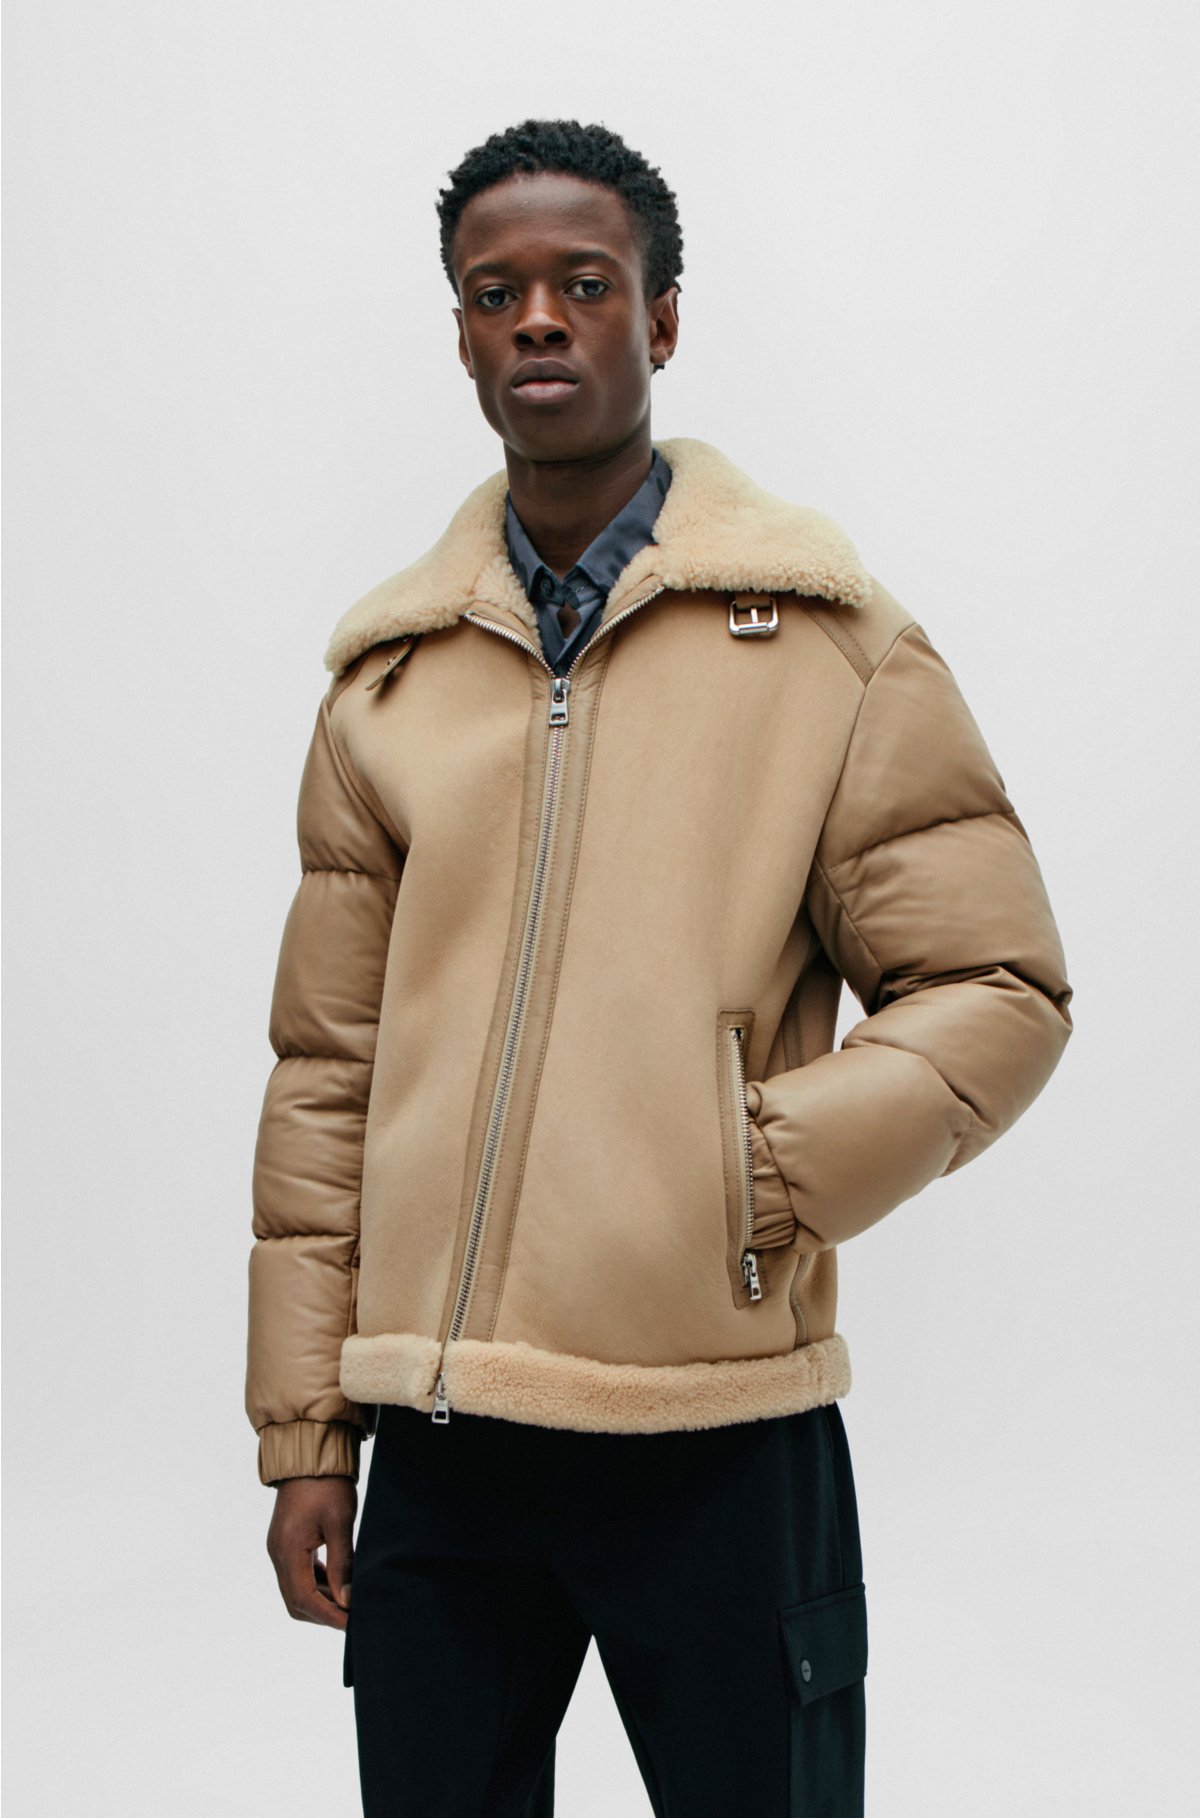 HUGO - Hybrid jacket in shearling suede and nappa leather